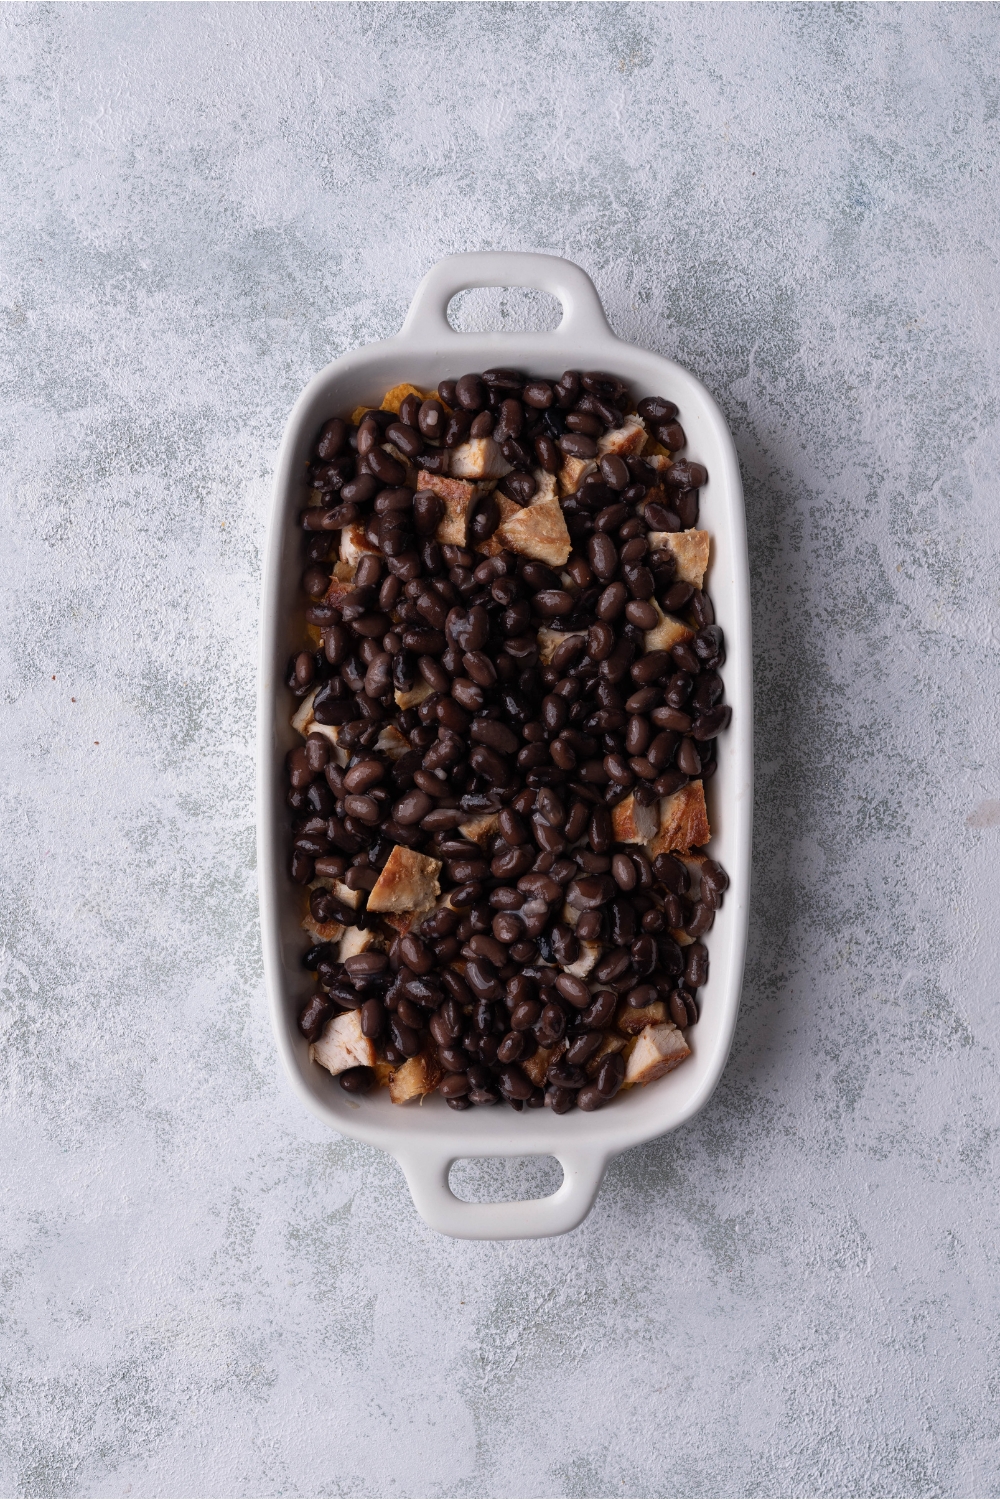 White baking dish filled with chicken and black beans.